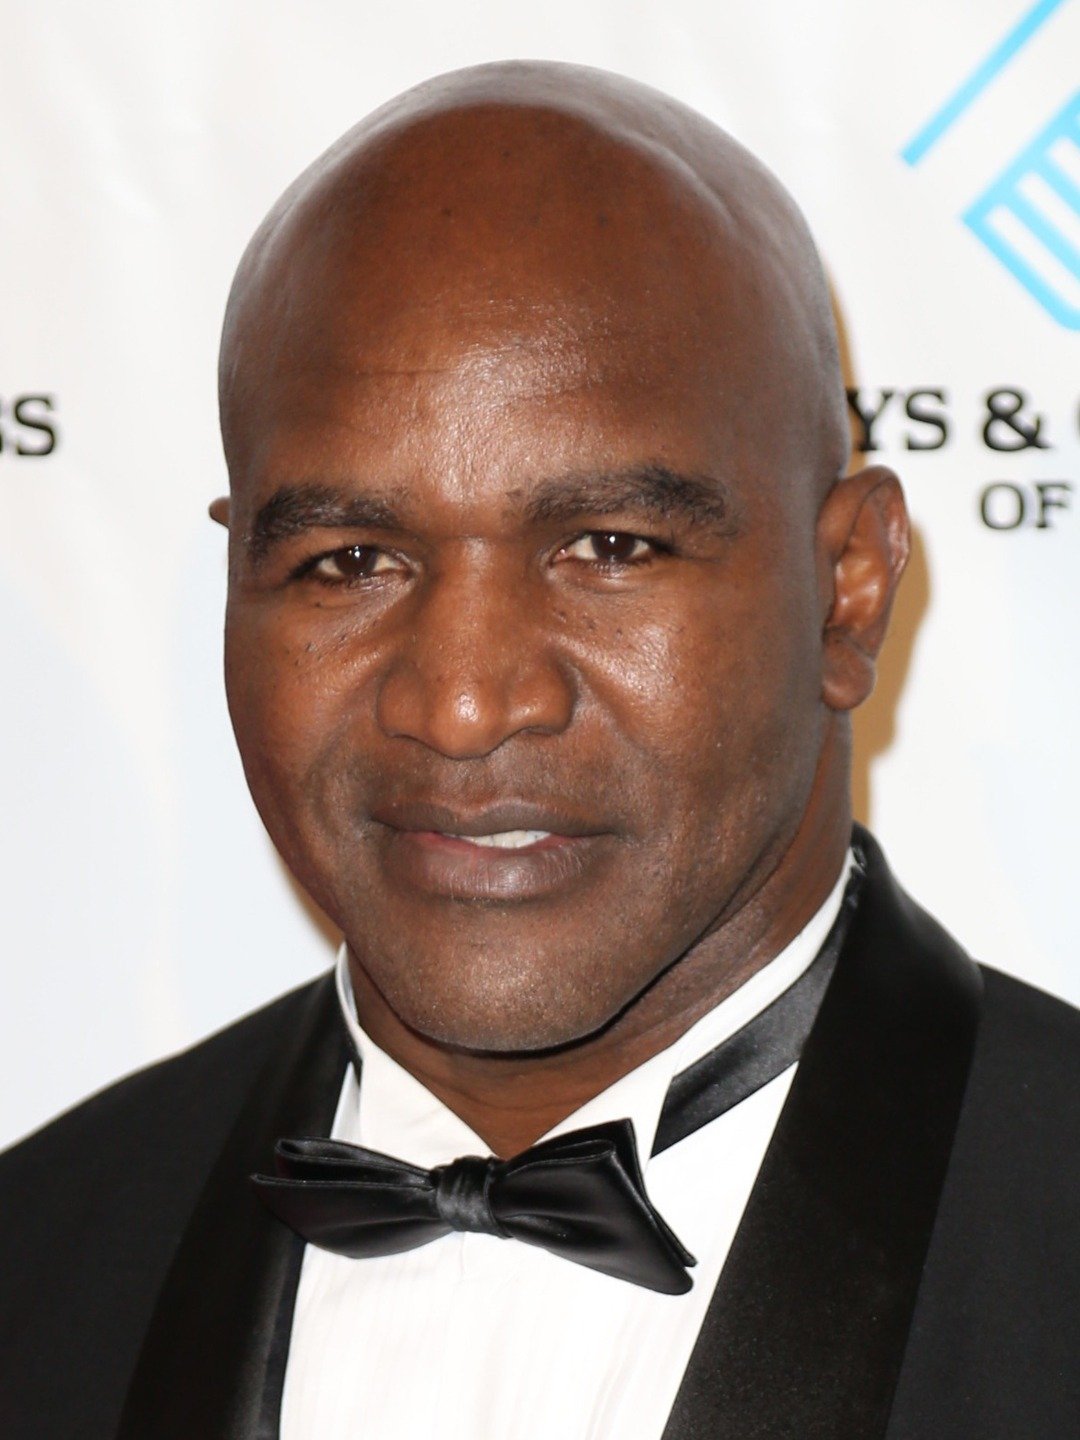 How tall is Evander Holyfield?